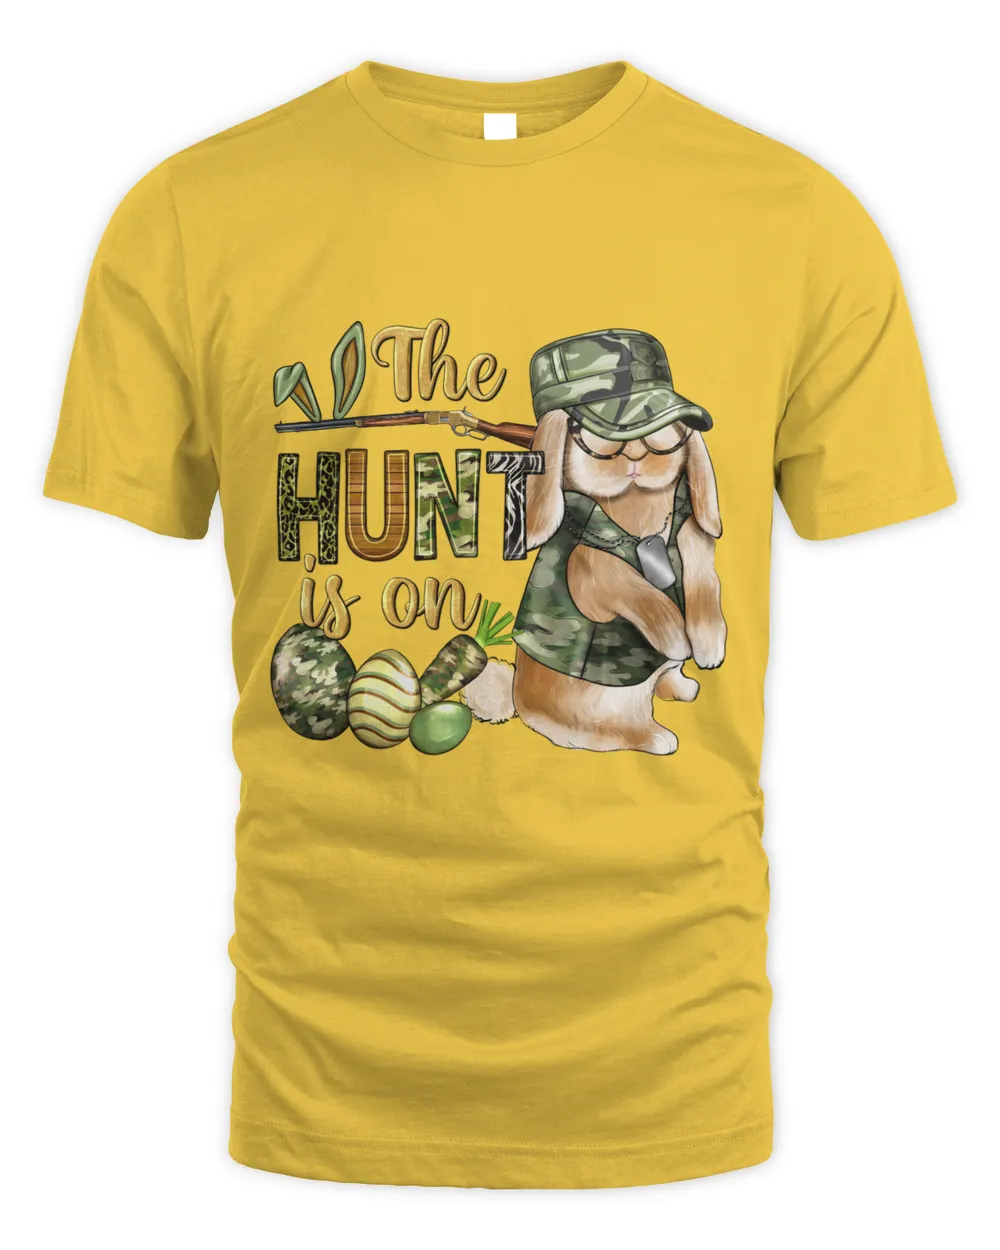 The Hunt is On Boys Easter Day Shirt